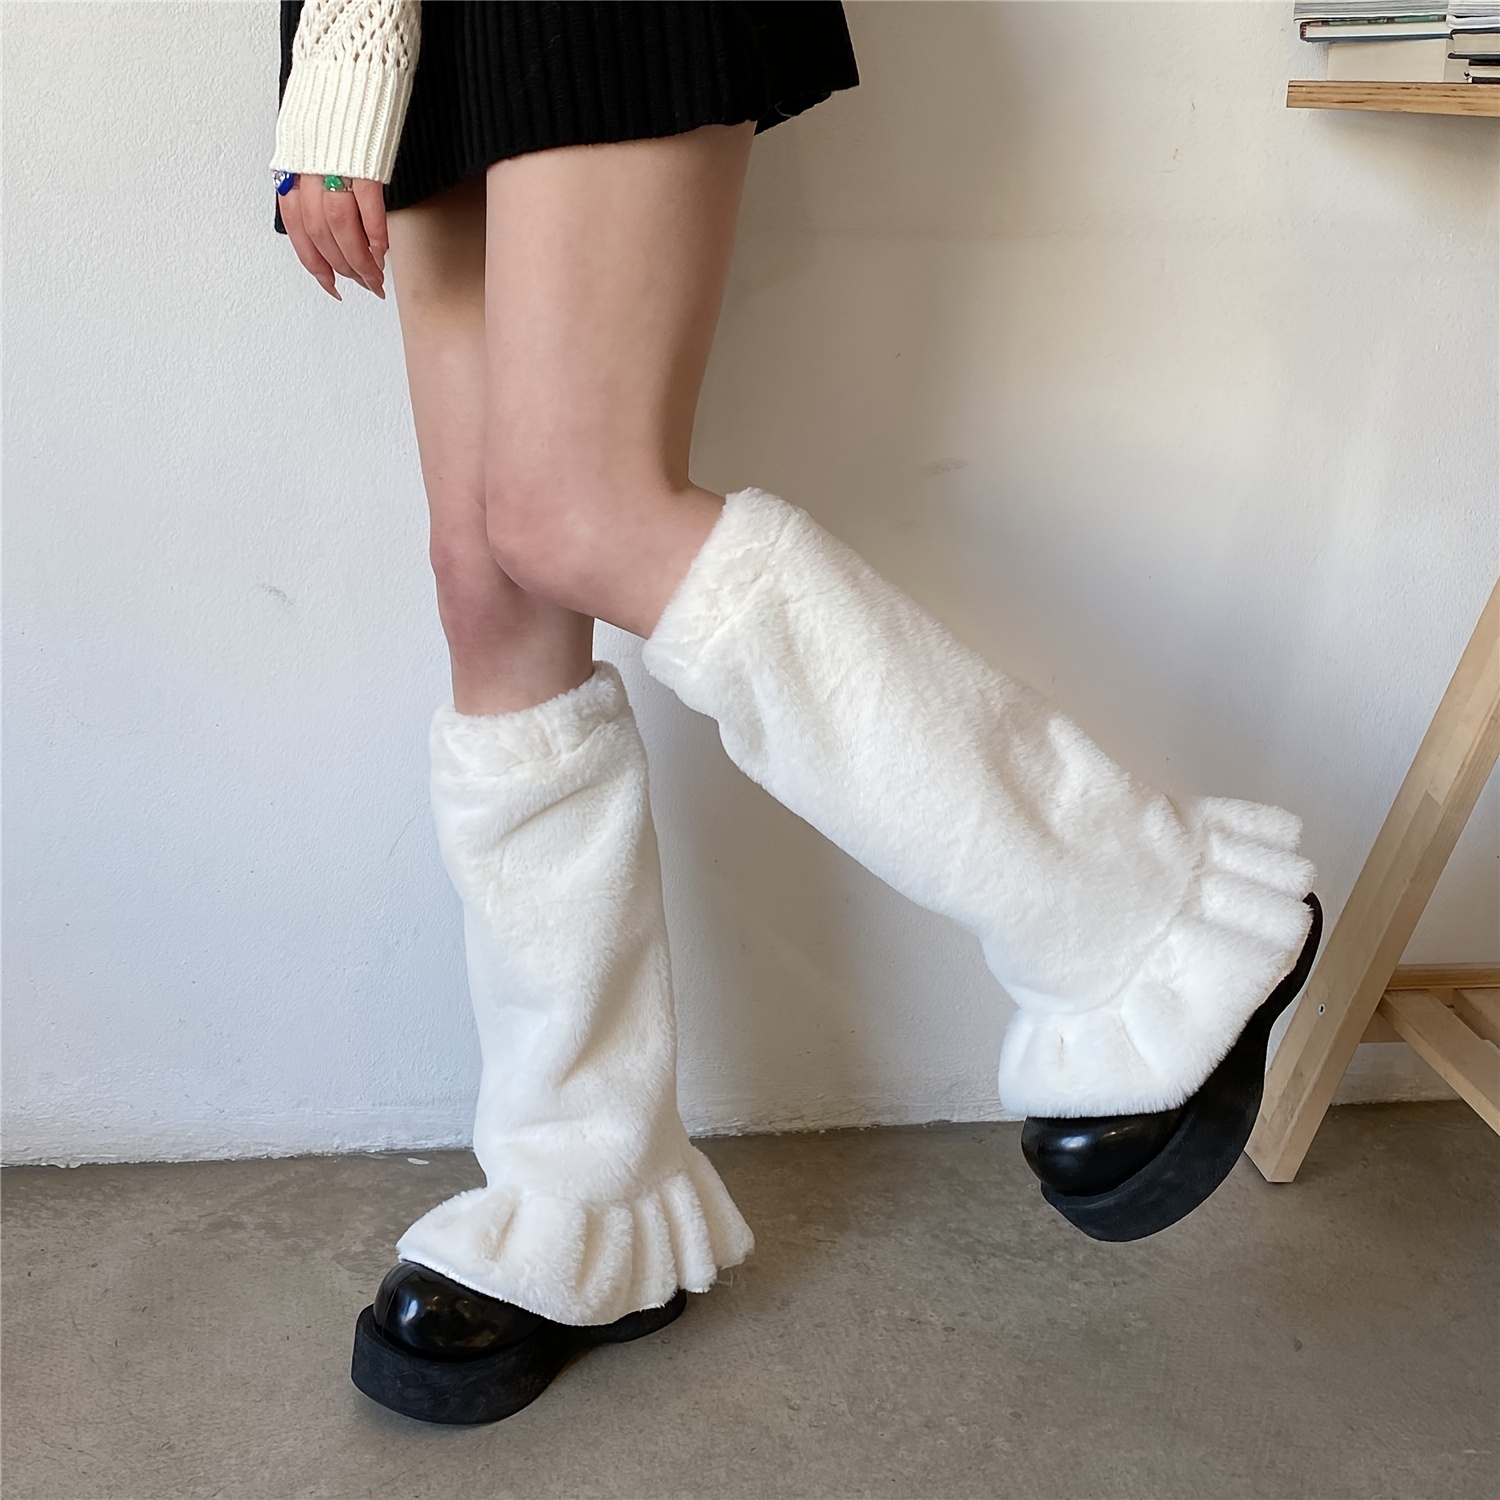 y2k leg warmers outfit  Leg warmers outfit, Platform shoes outfit, White  sneakers outfit